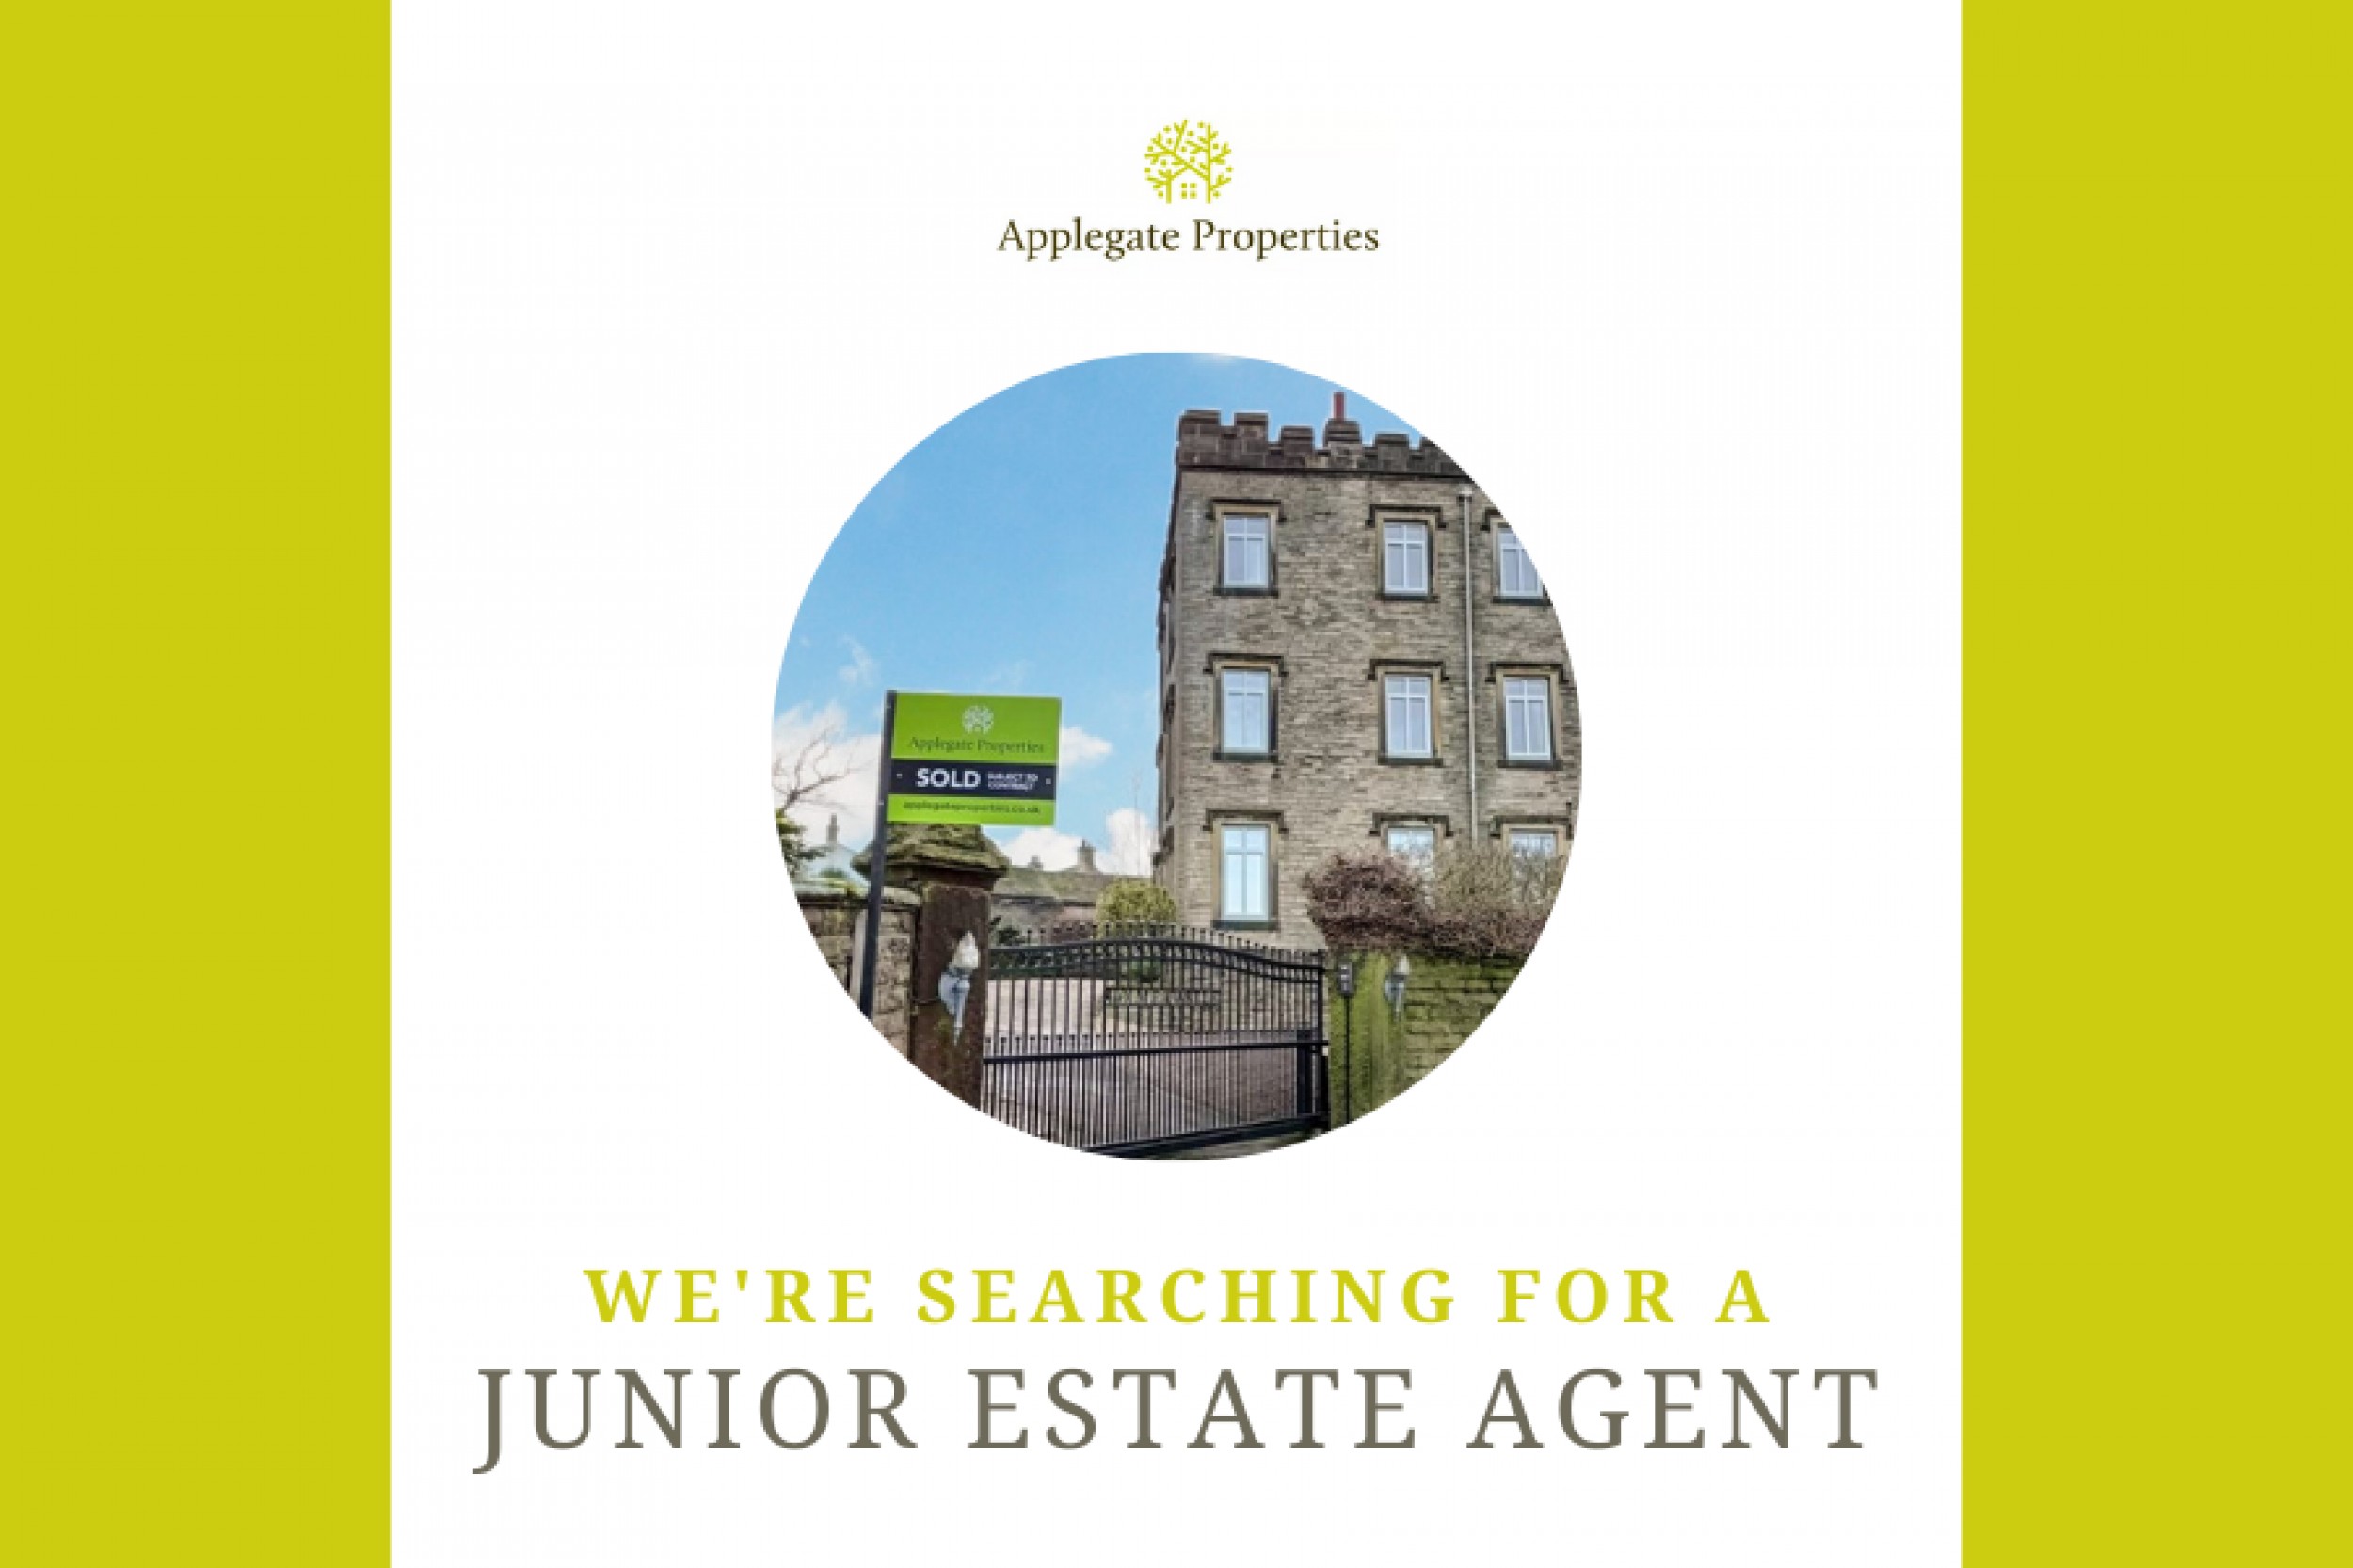 We're searching for a junior estate agent